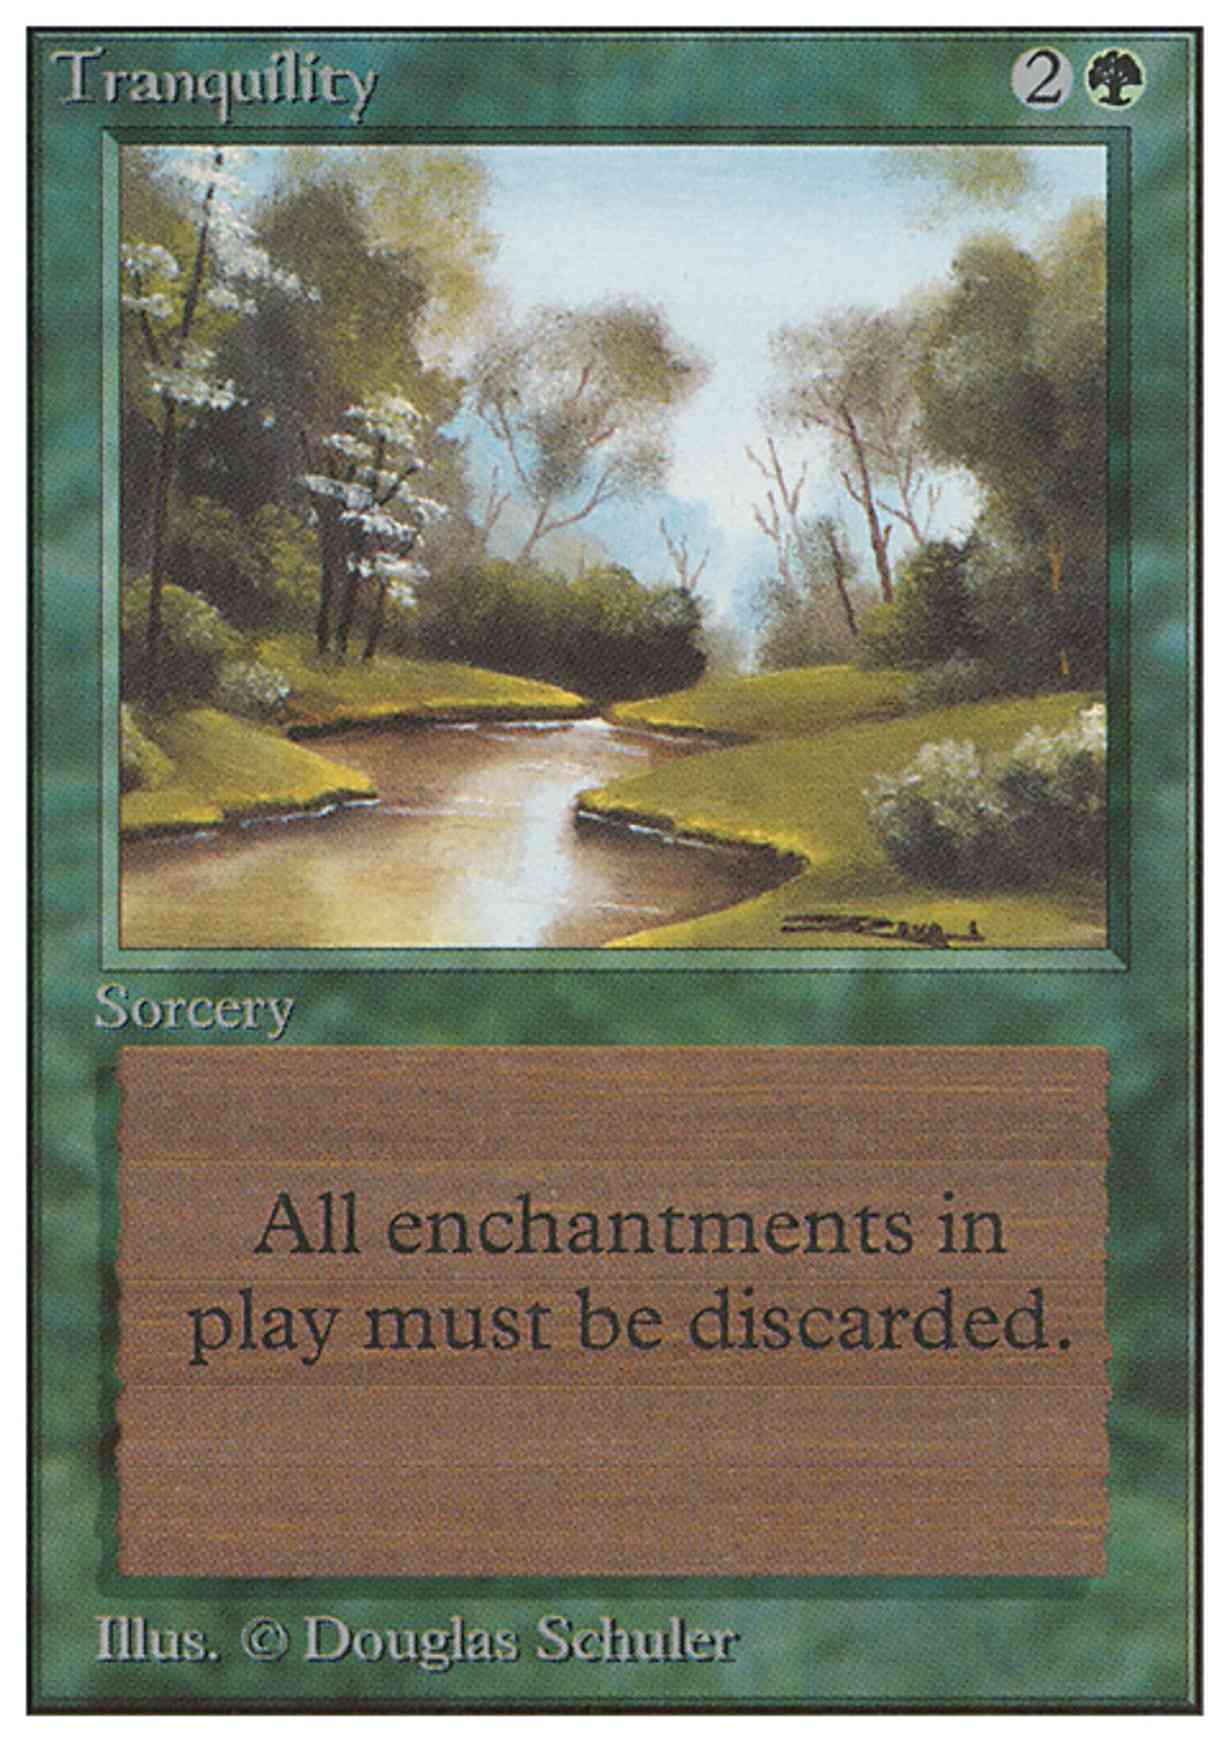 Tranquility magic card front